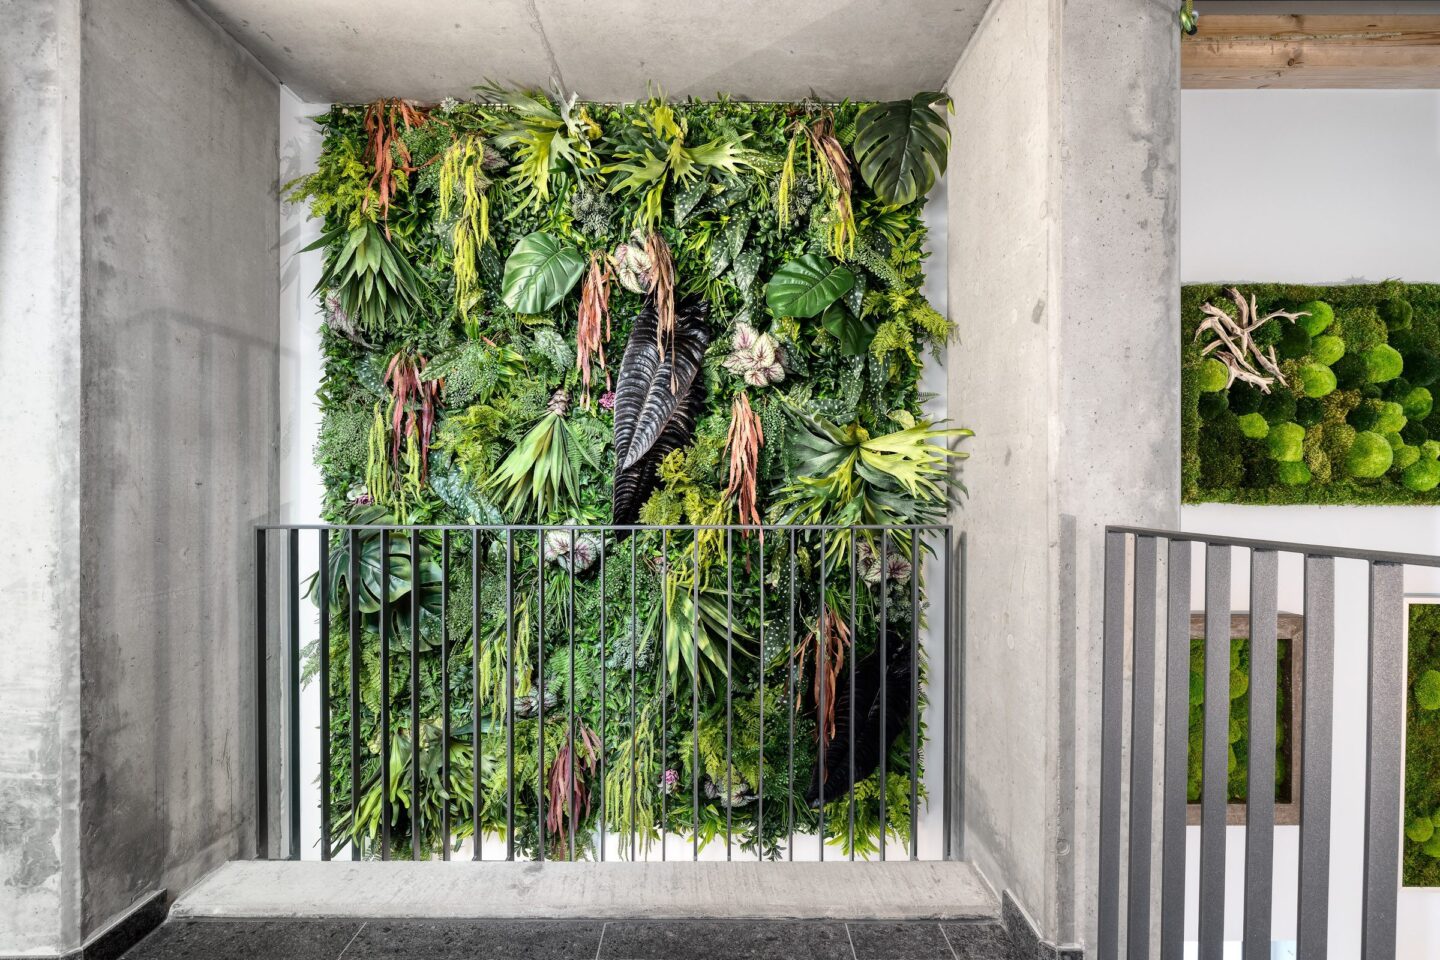 The BIOPHILICUM is not only a new company building, but also a showpiece for contemporary indoor greening. It shows how modern offices can become lively green oases where people enjoy working.